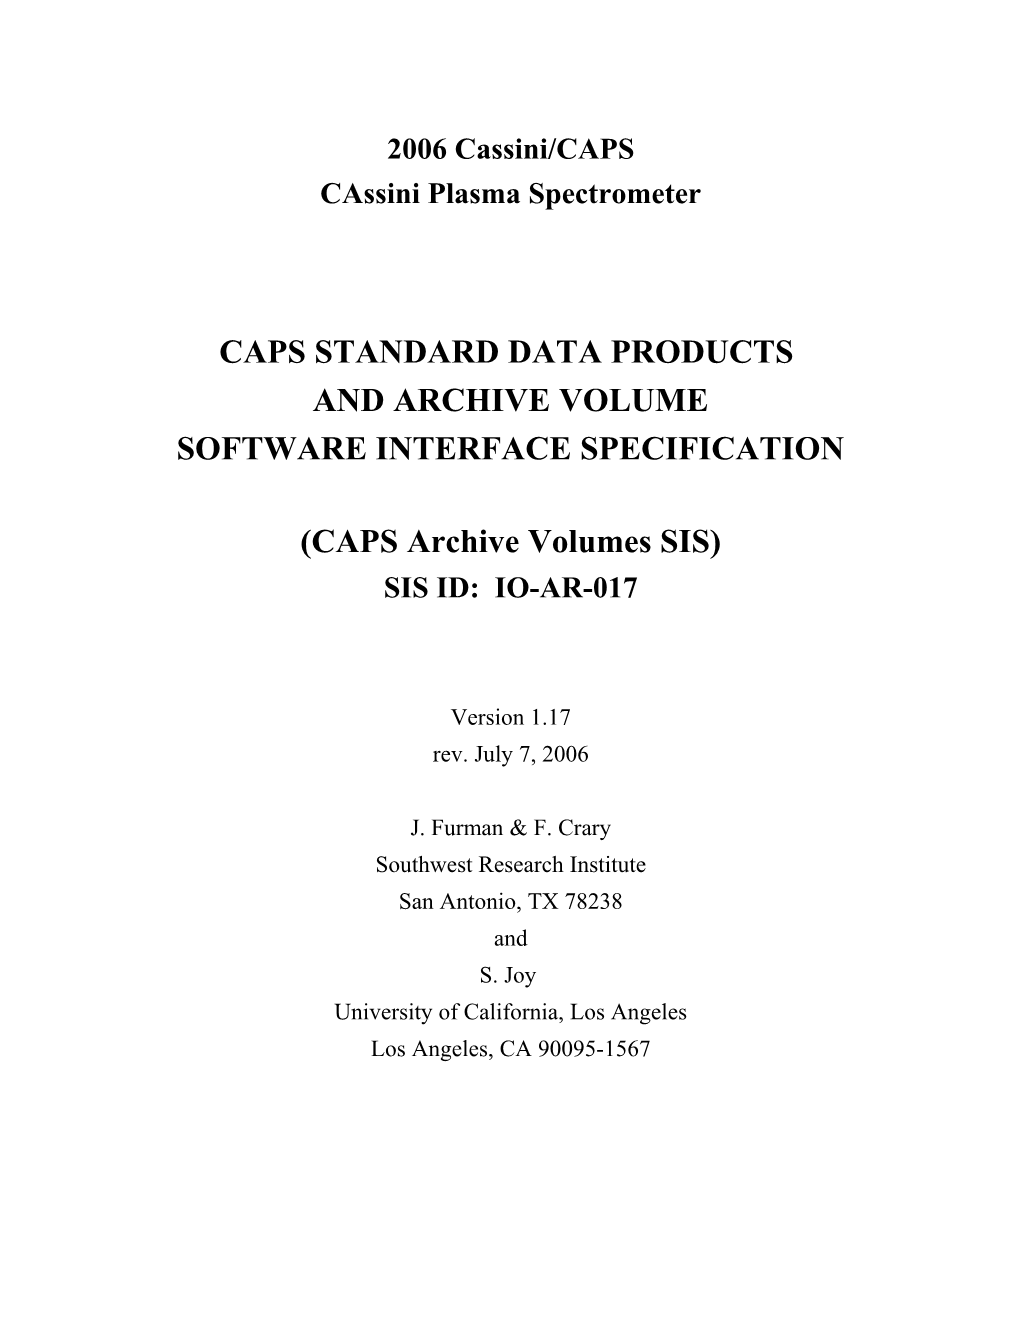 CAPS Standard Data Products and Archive Volume Software Interface Specification